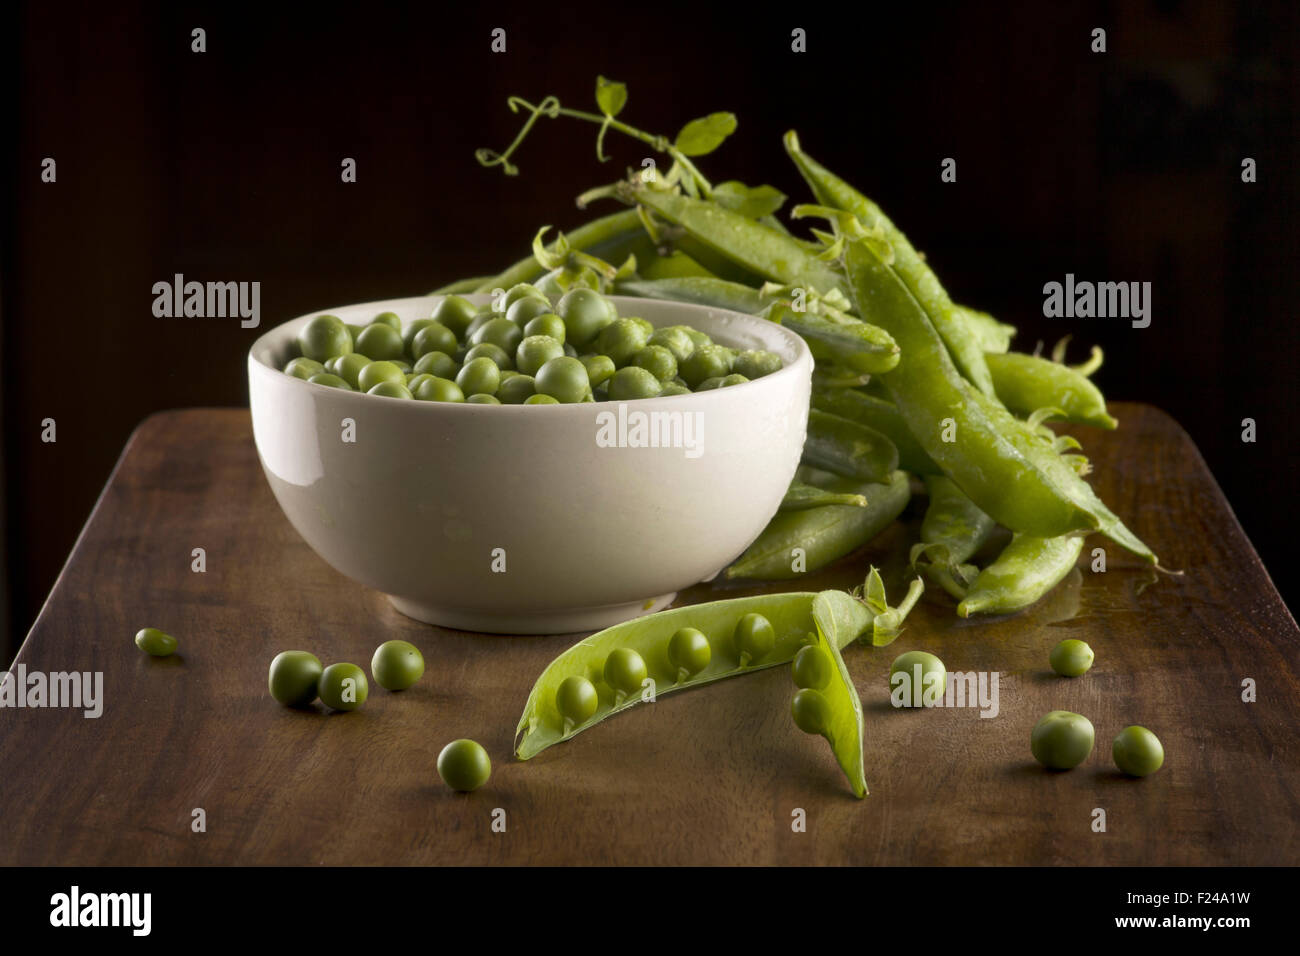 Fresh green peas with pods in the bowl on the wooden table Stock Photo